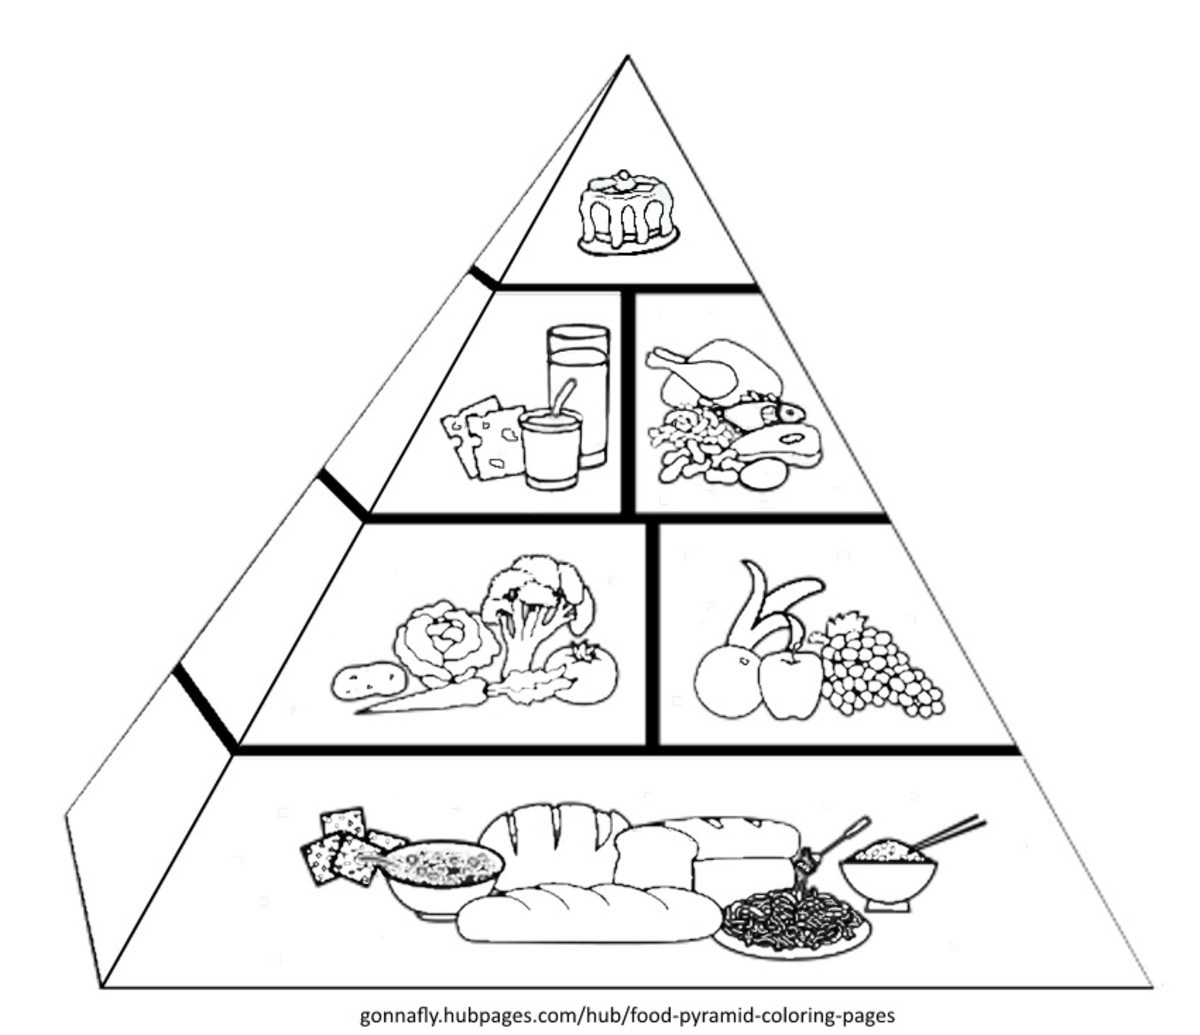 Food Pyramid Coloring Pages | HubPages